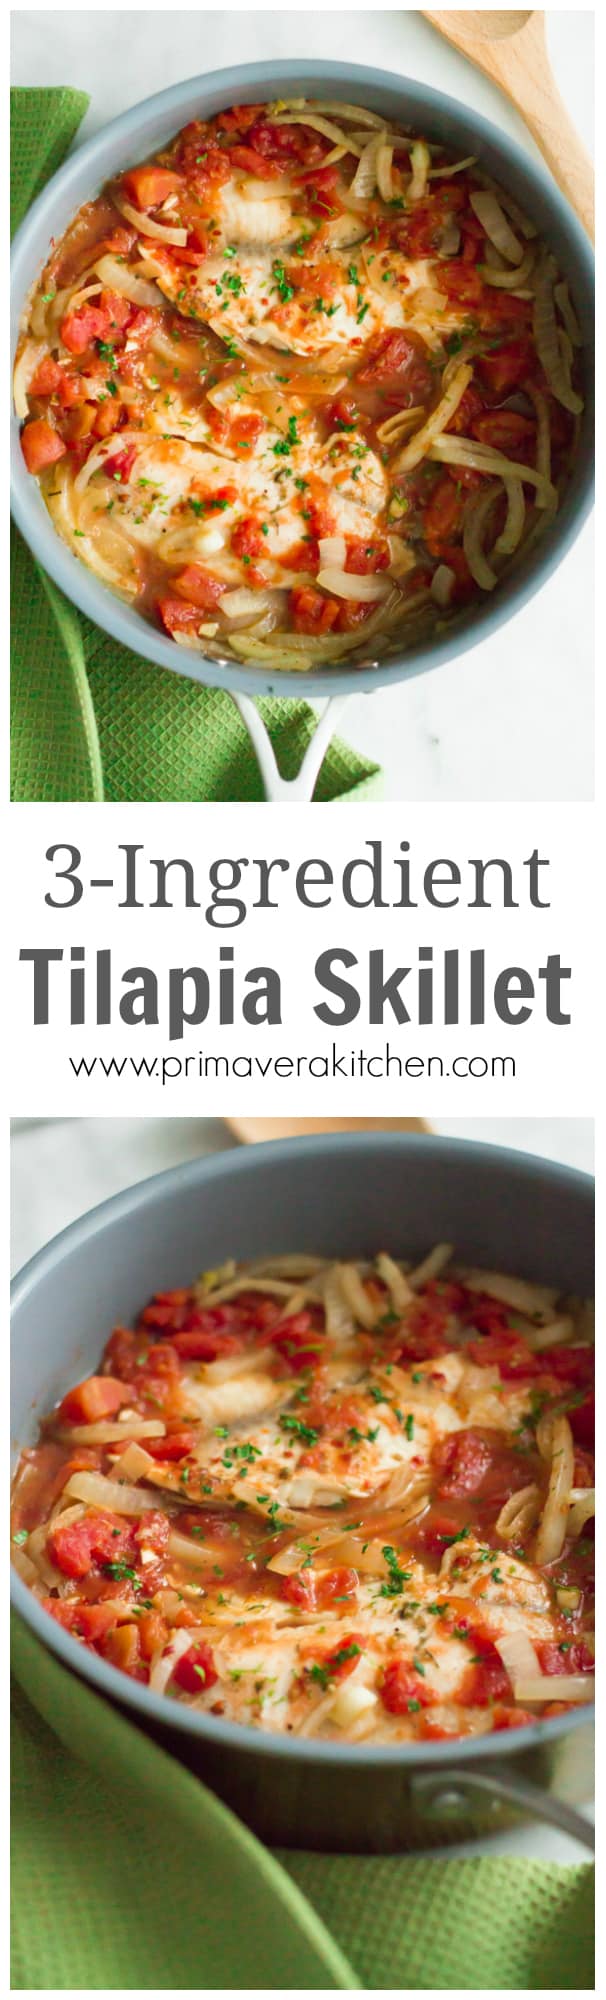 3-ingredient Tilapia Skillet - This 3-Ingredient Tilapia Skillet with diced tomatoes and onions is a quick, easy, healthy and delicious weeknight dinner. 